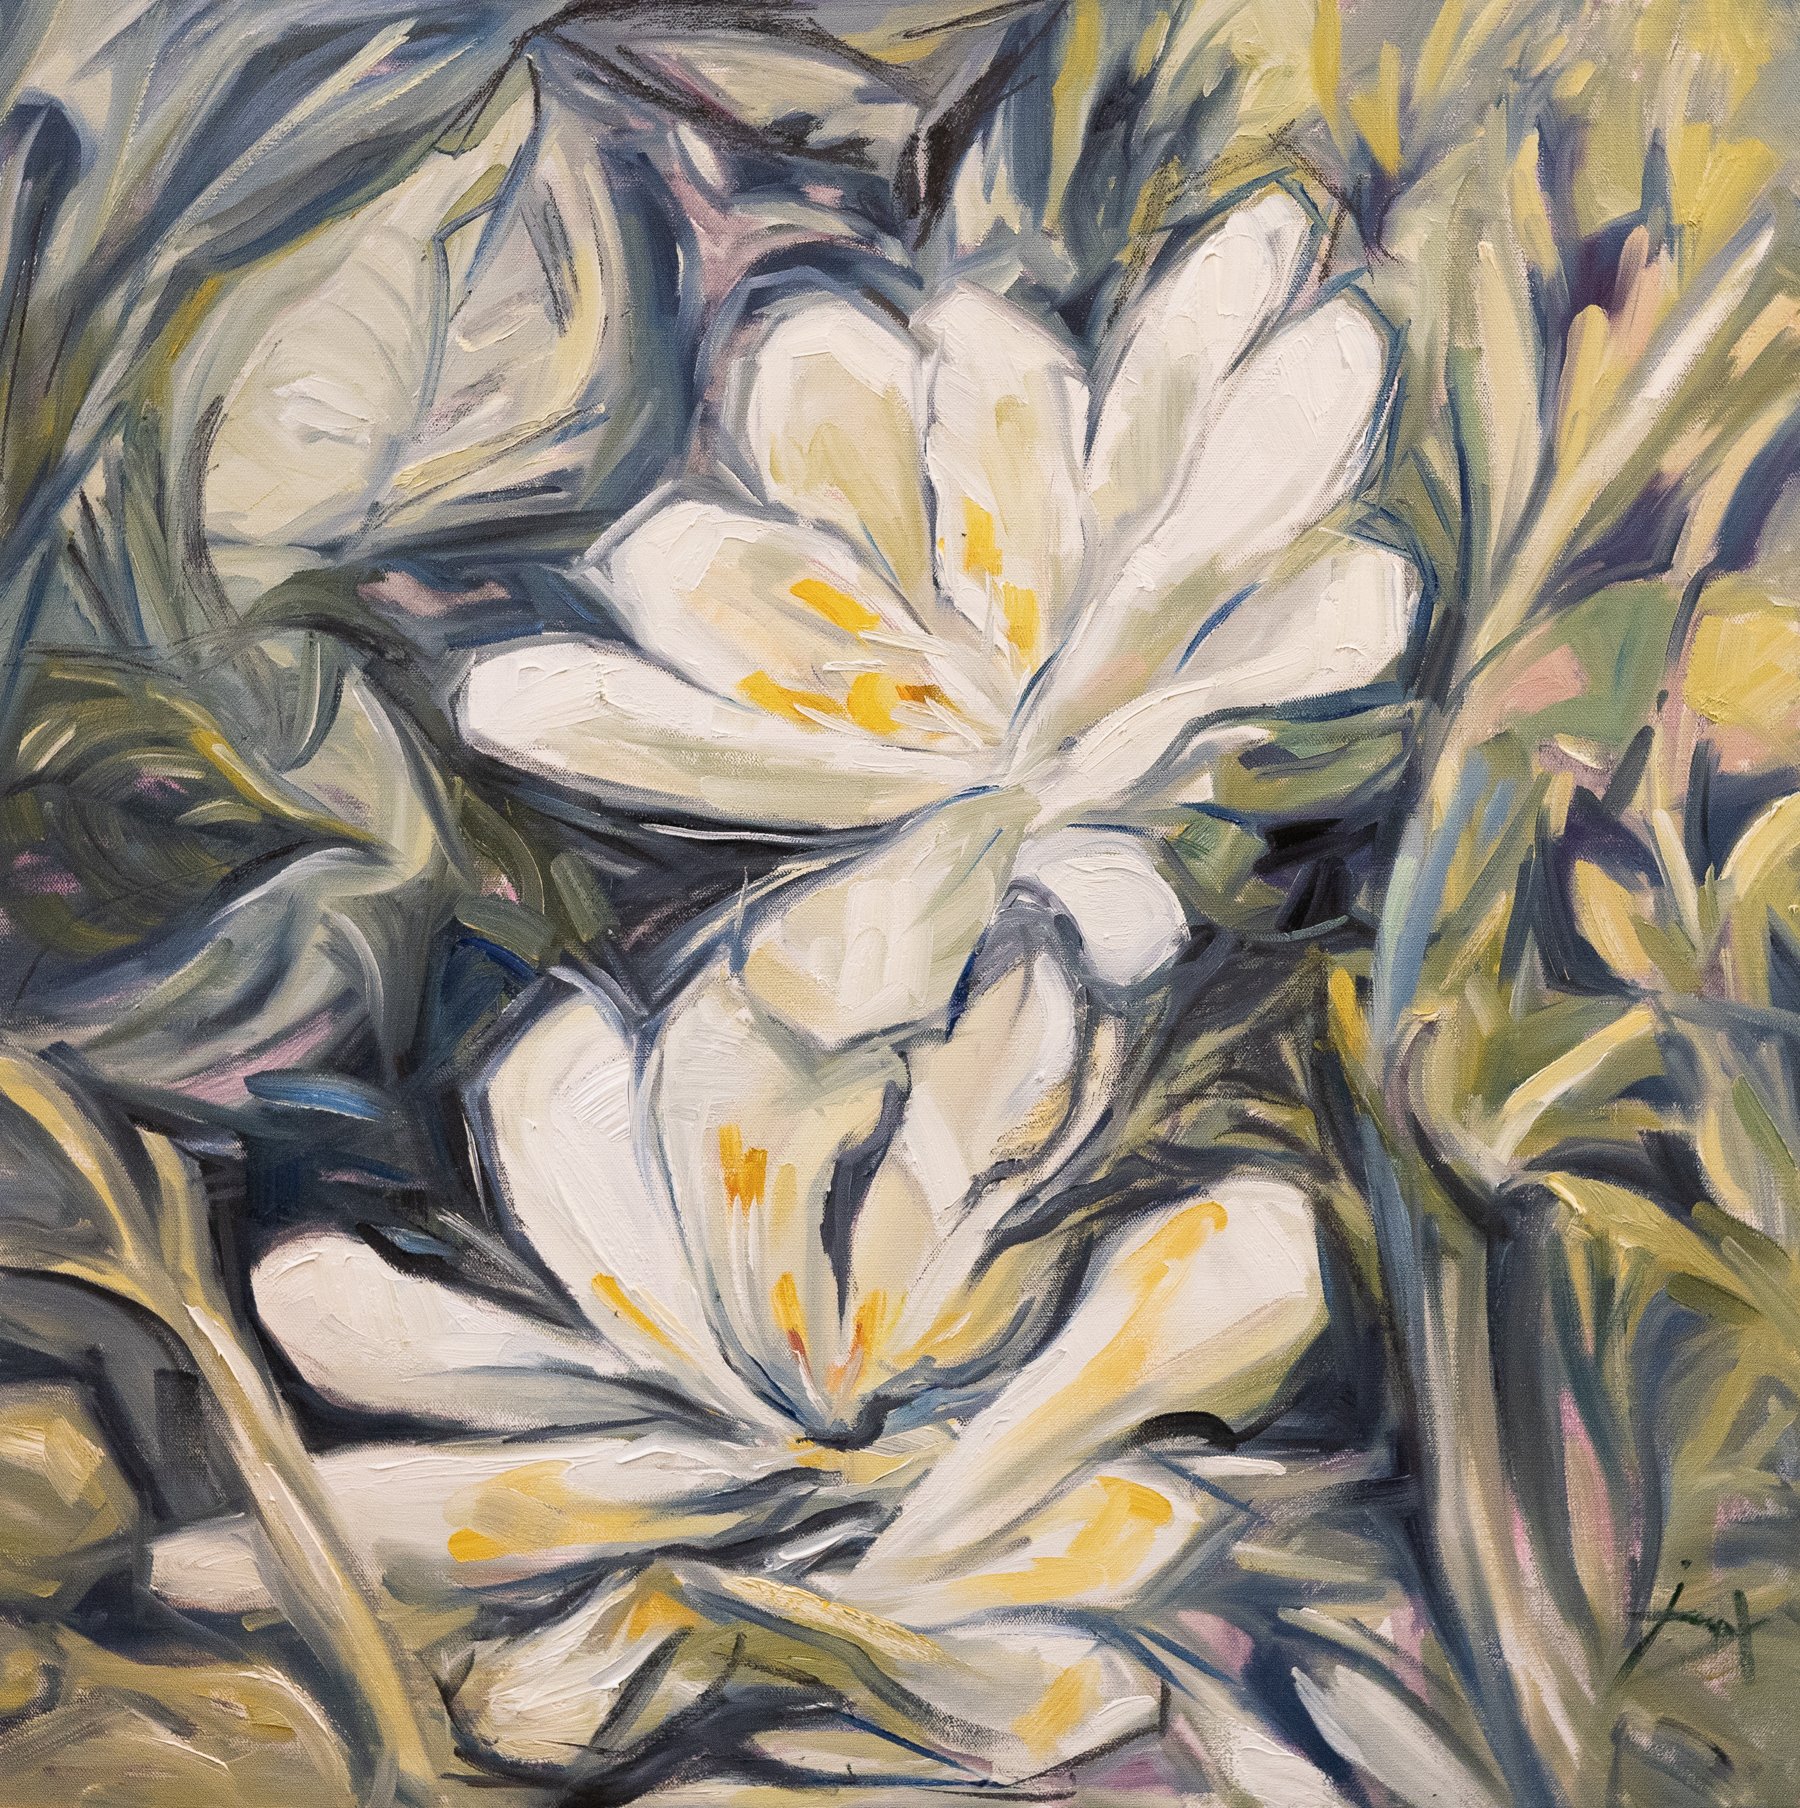   Morning Whiteness   30" x 30"   Oil on canvas  